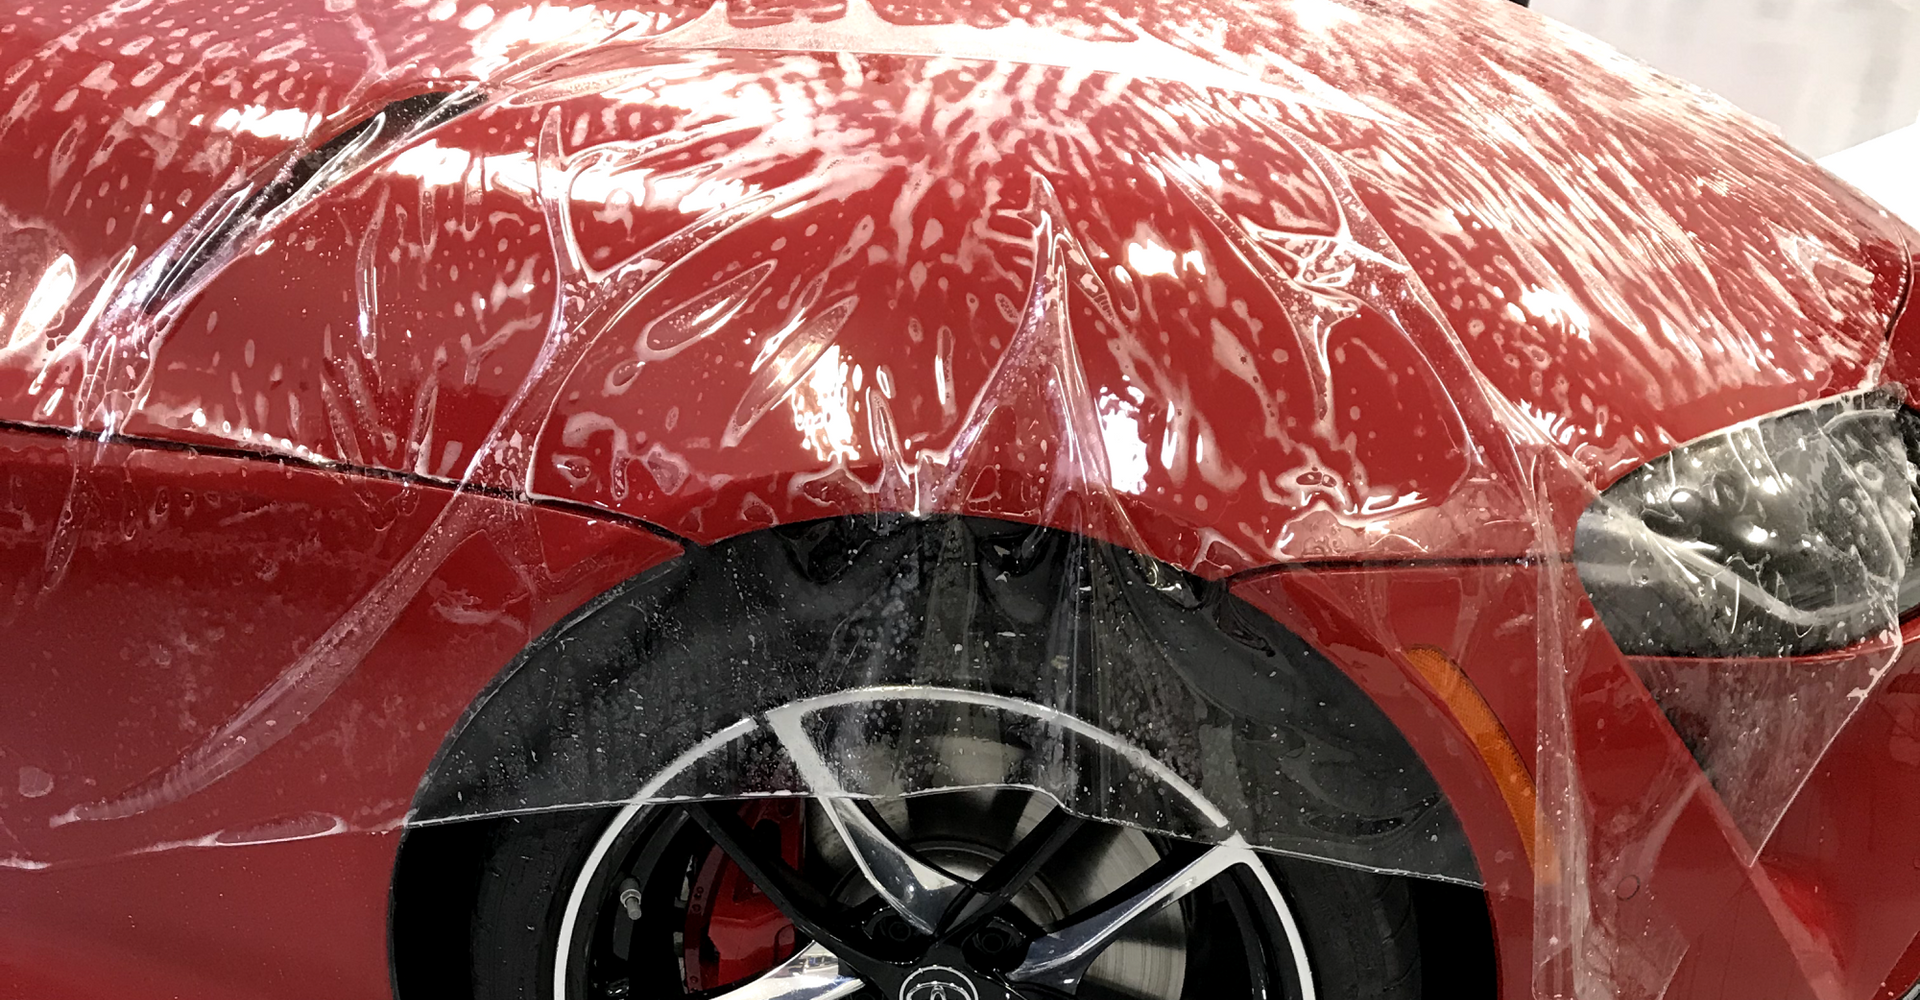 A red car is covered in plastic wrap.